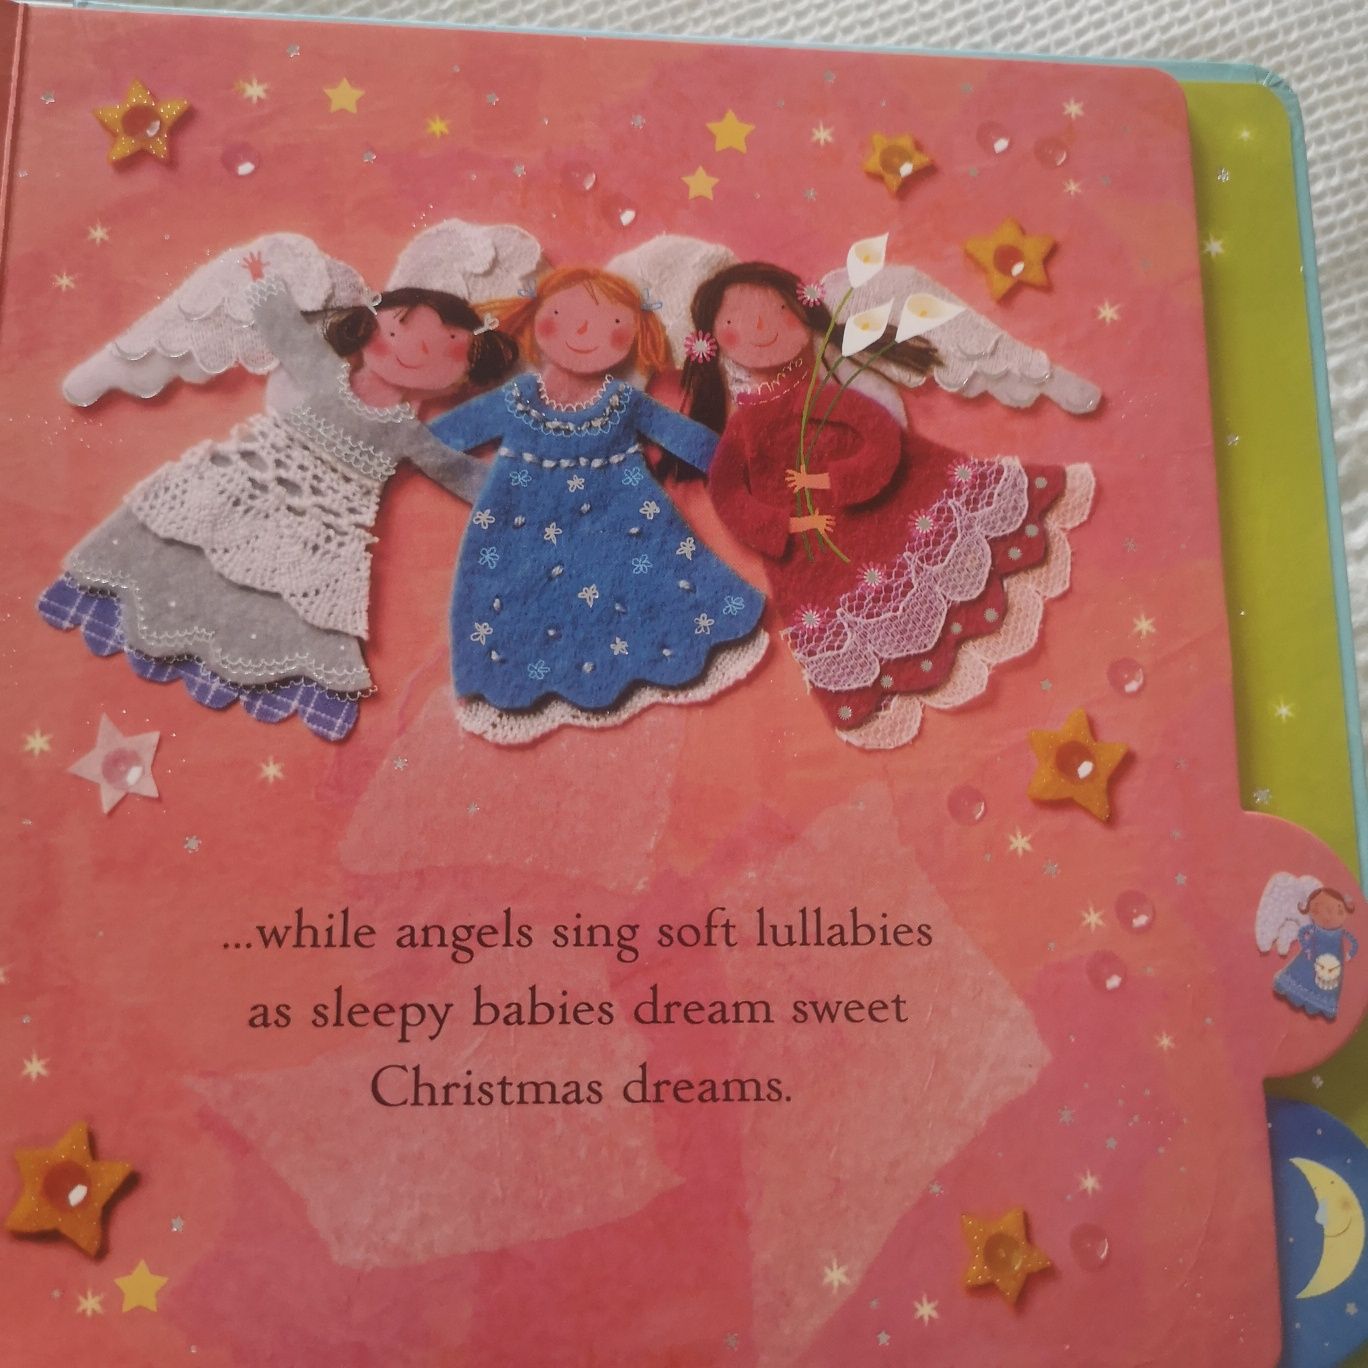 Baby's First Christmas carte+CD colinde Usborne